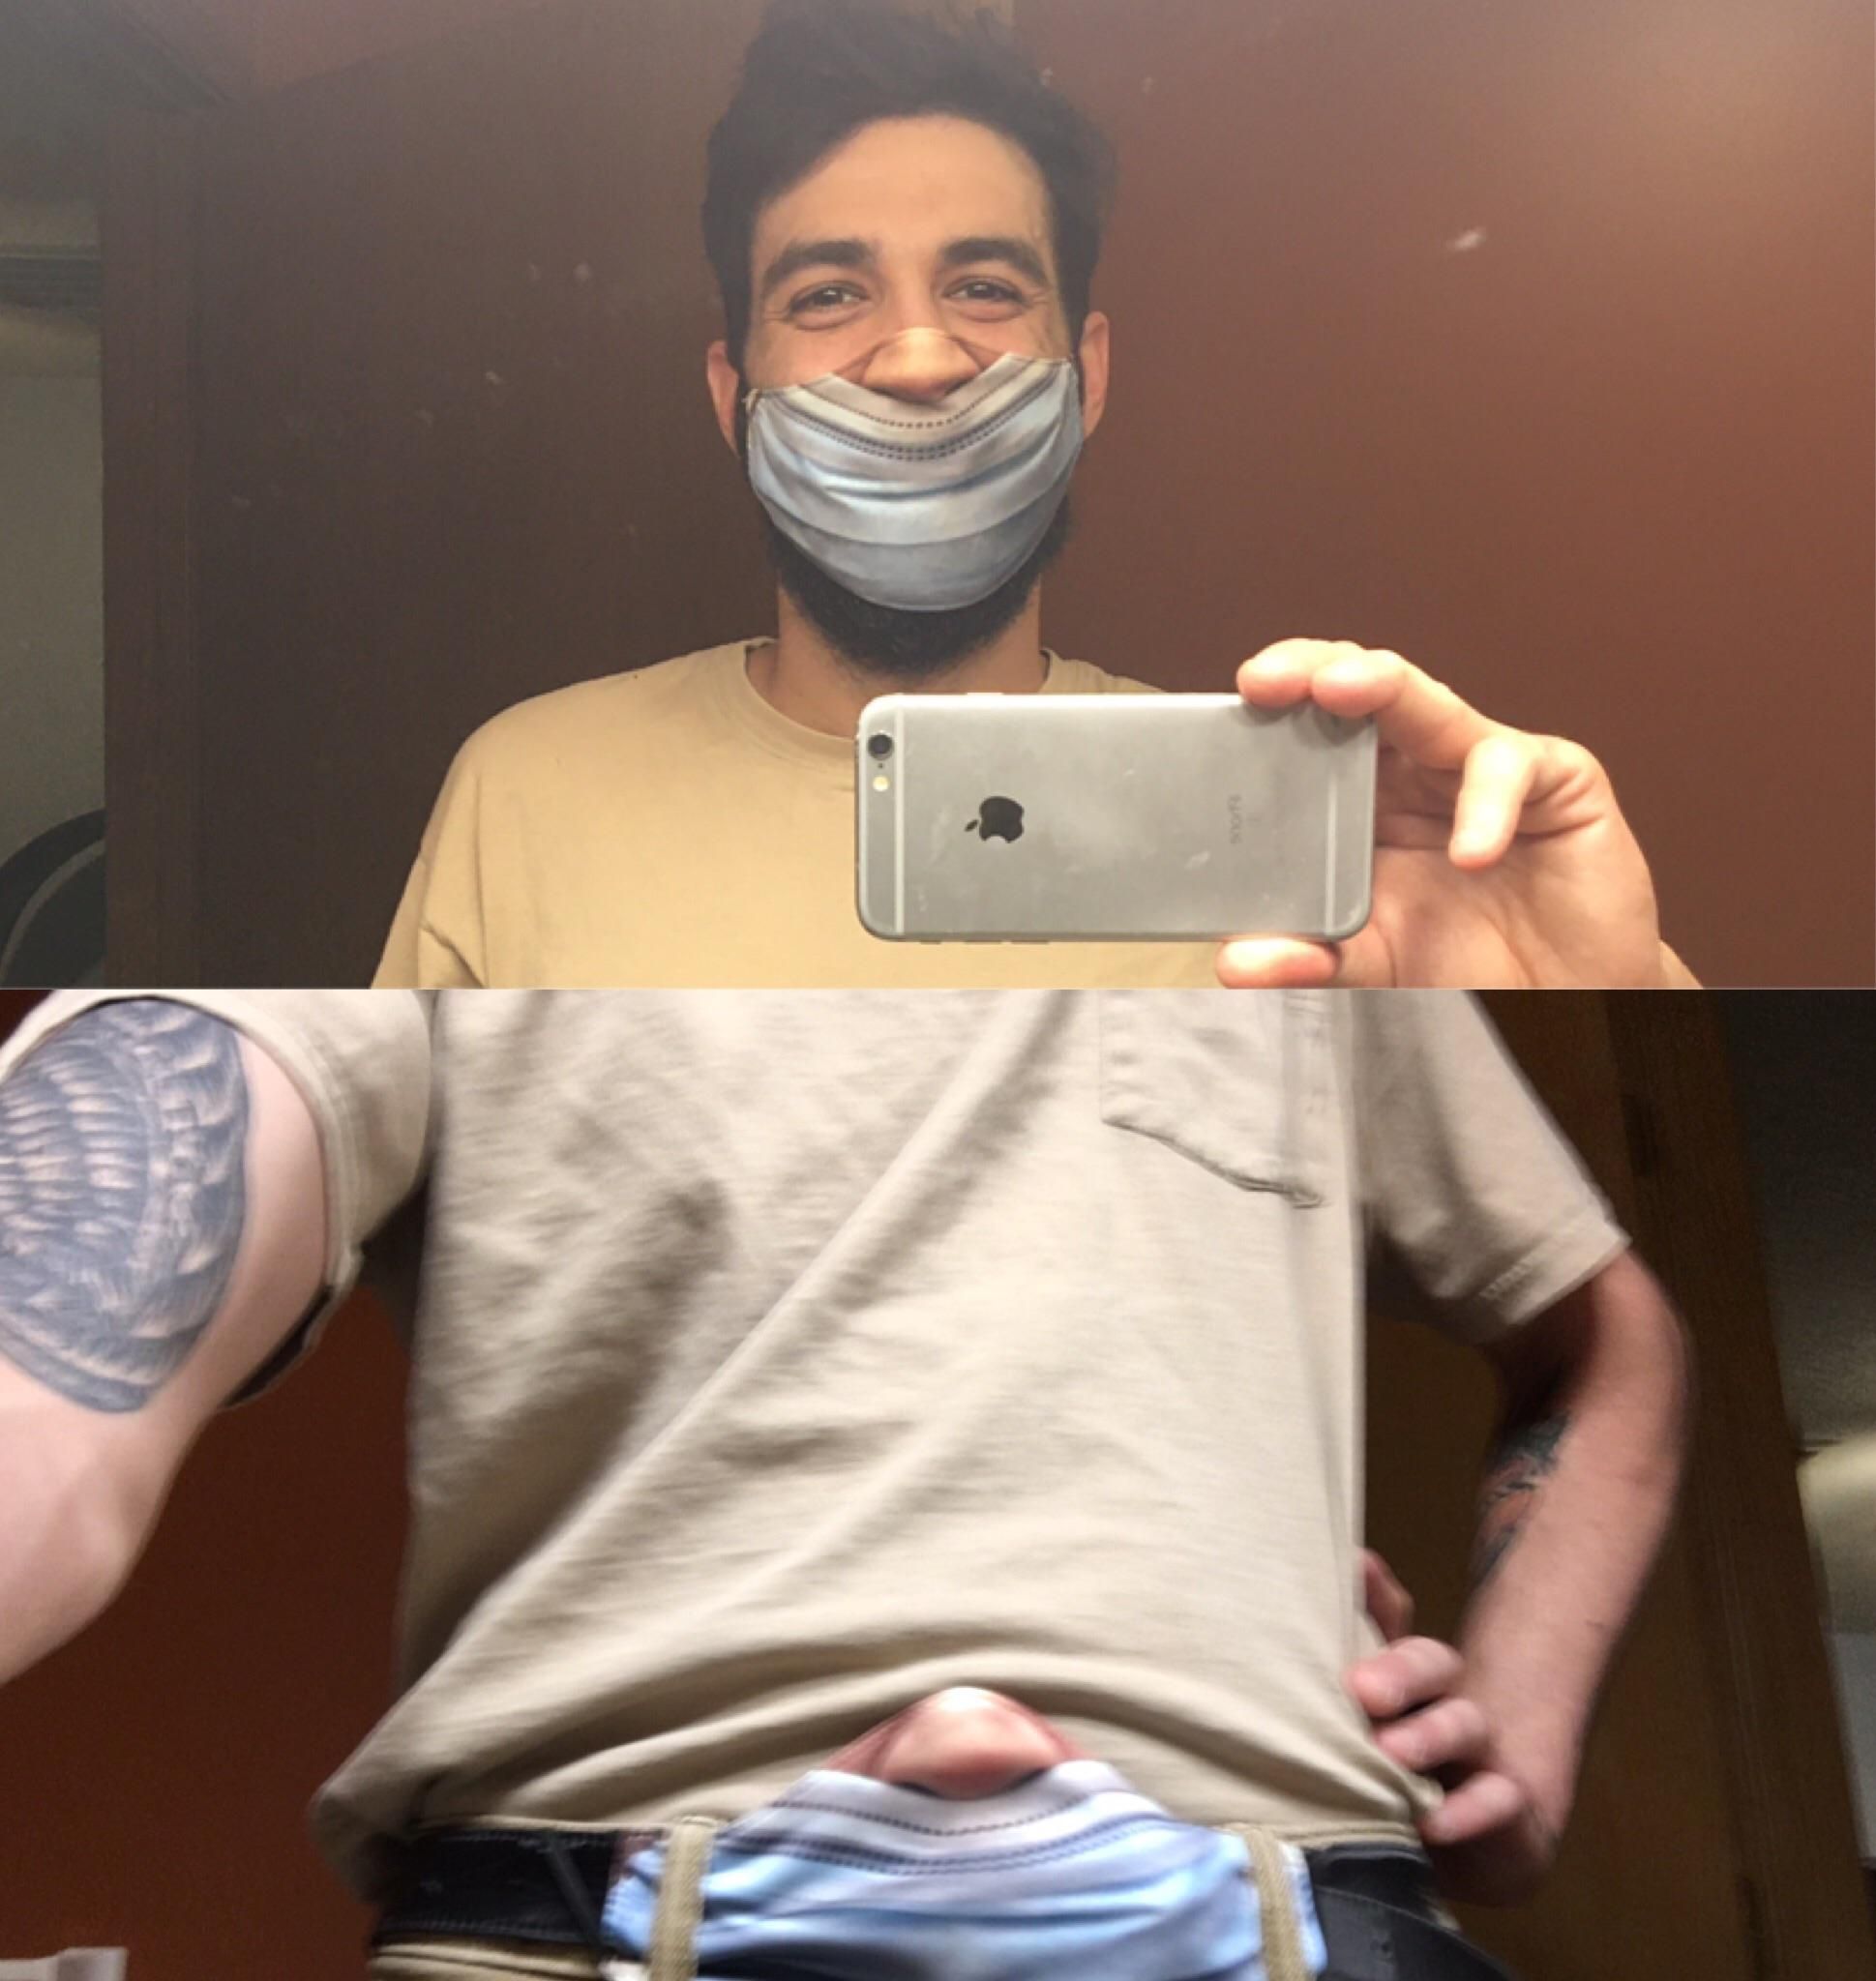 My stupid dicknose mask also doubles as an awkward belt buckle!